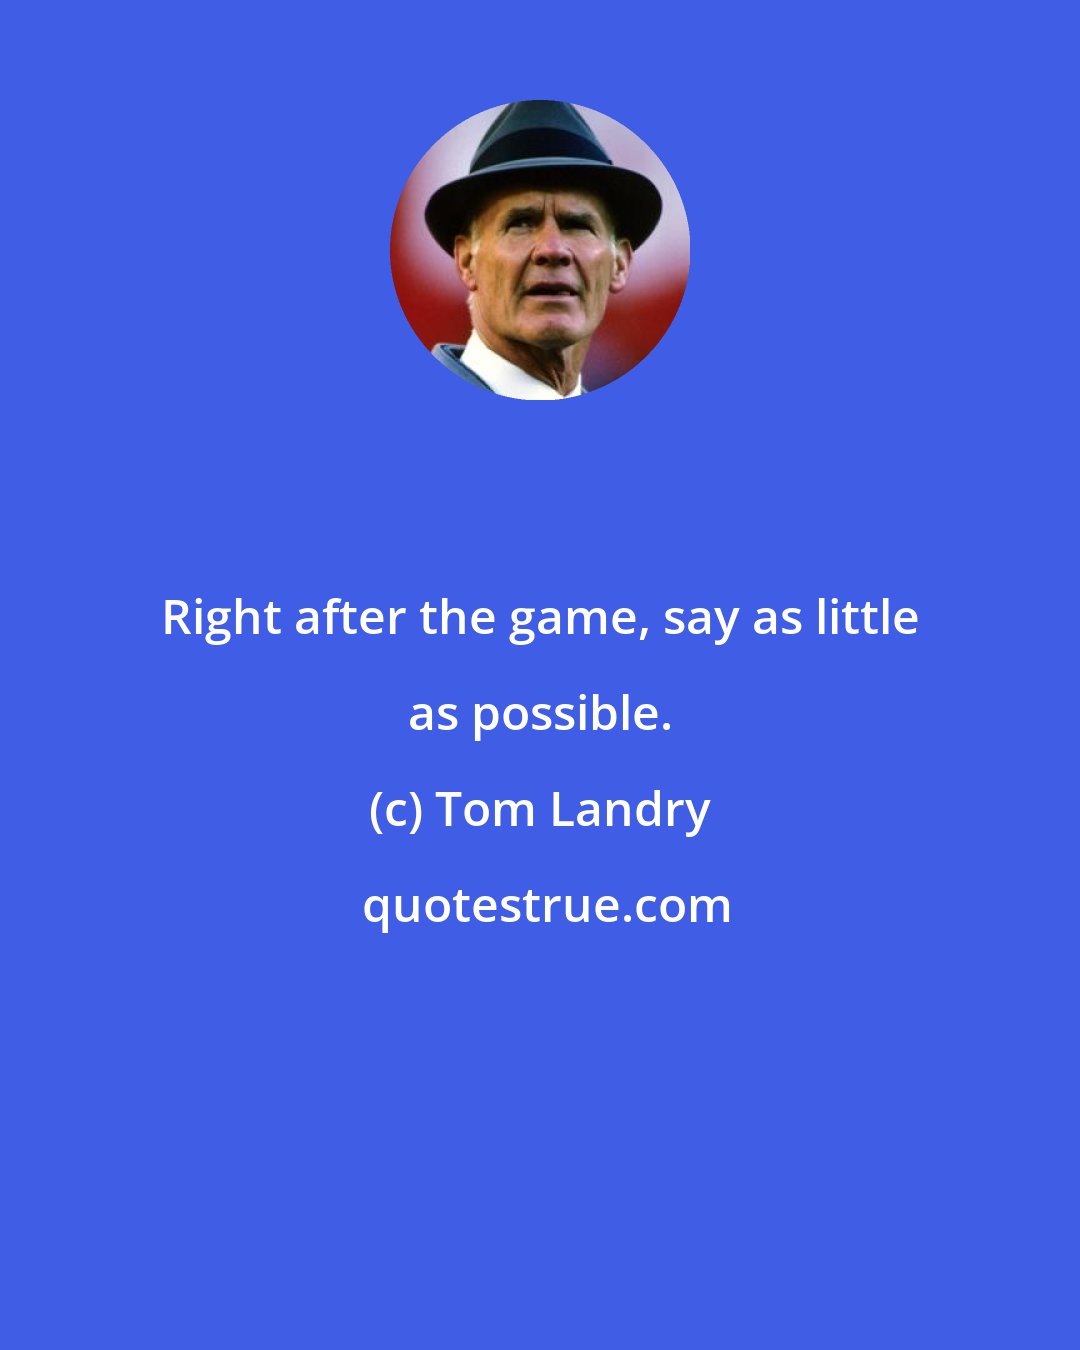 Tom Landry: Right after the game, say as little as possible.